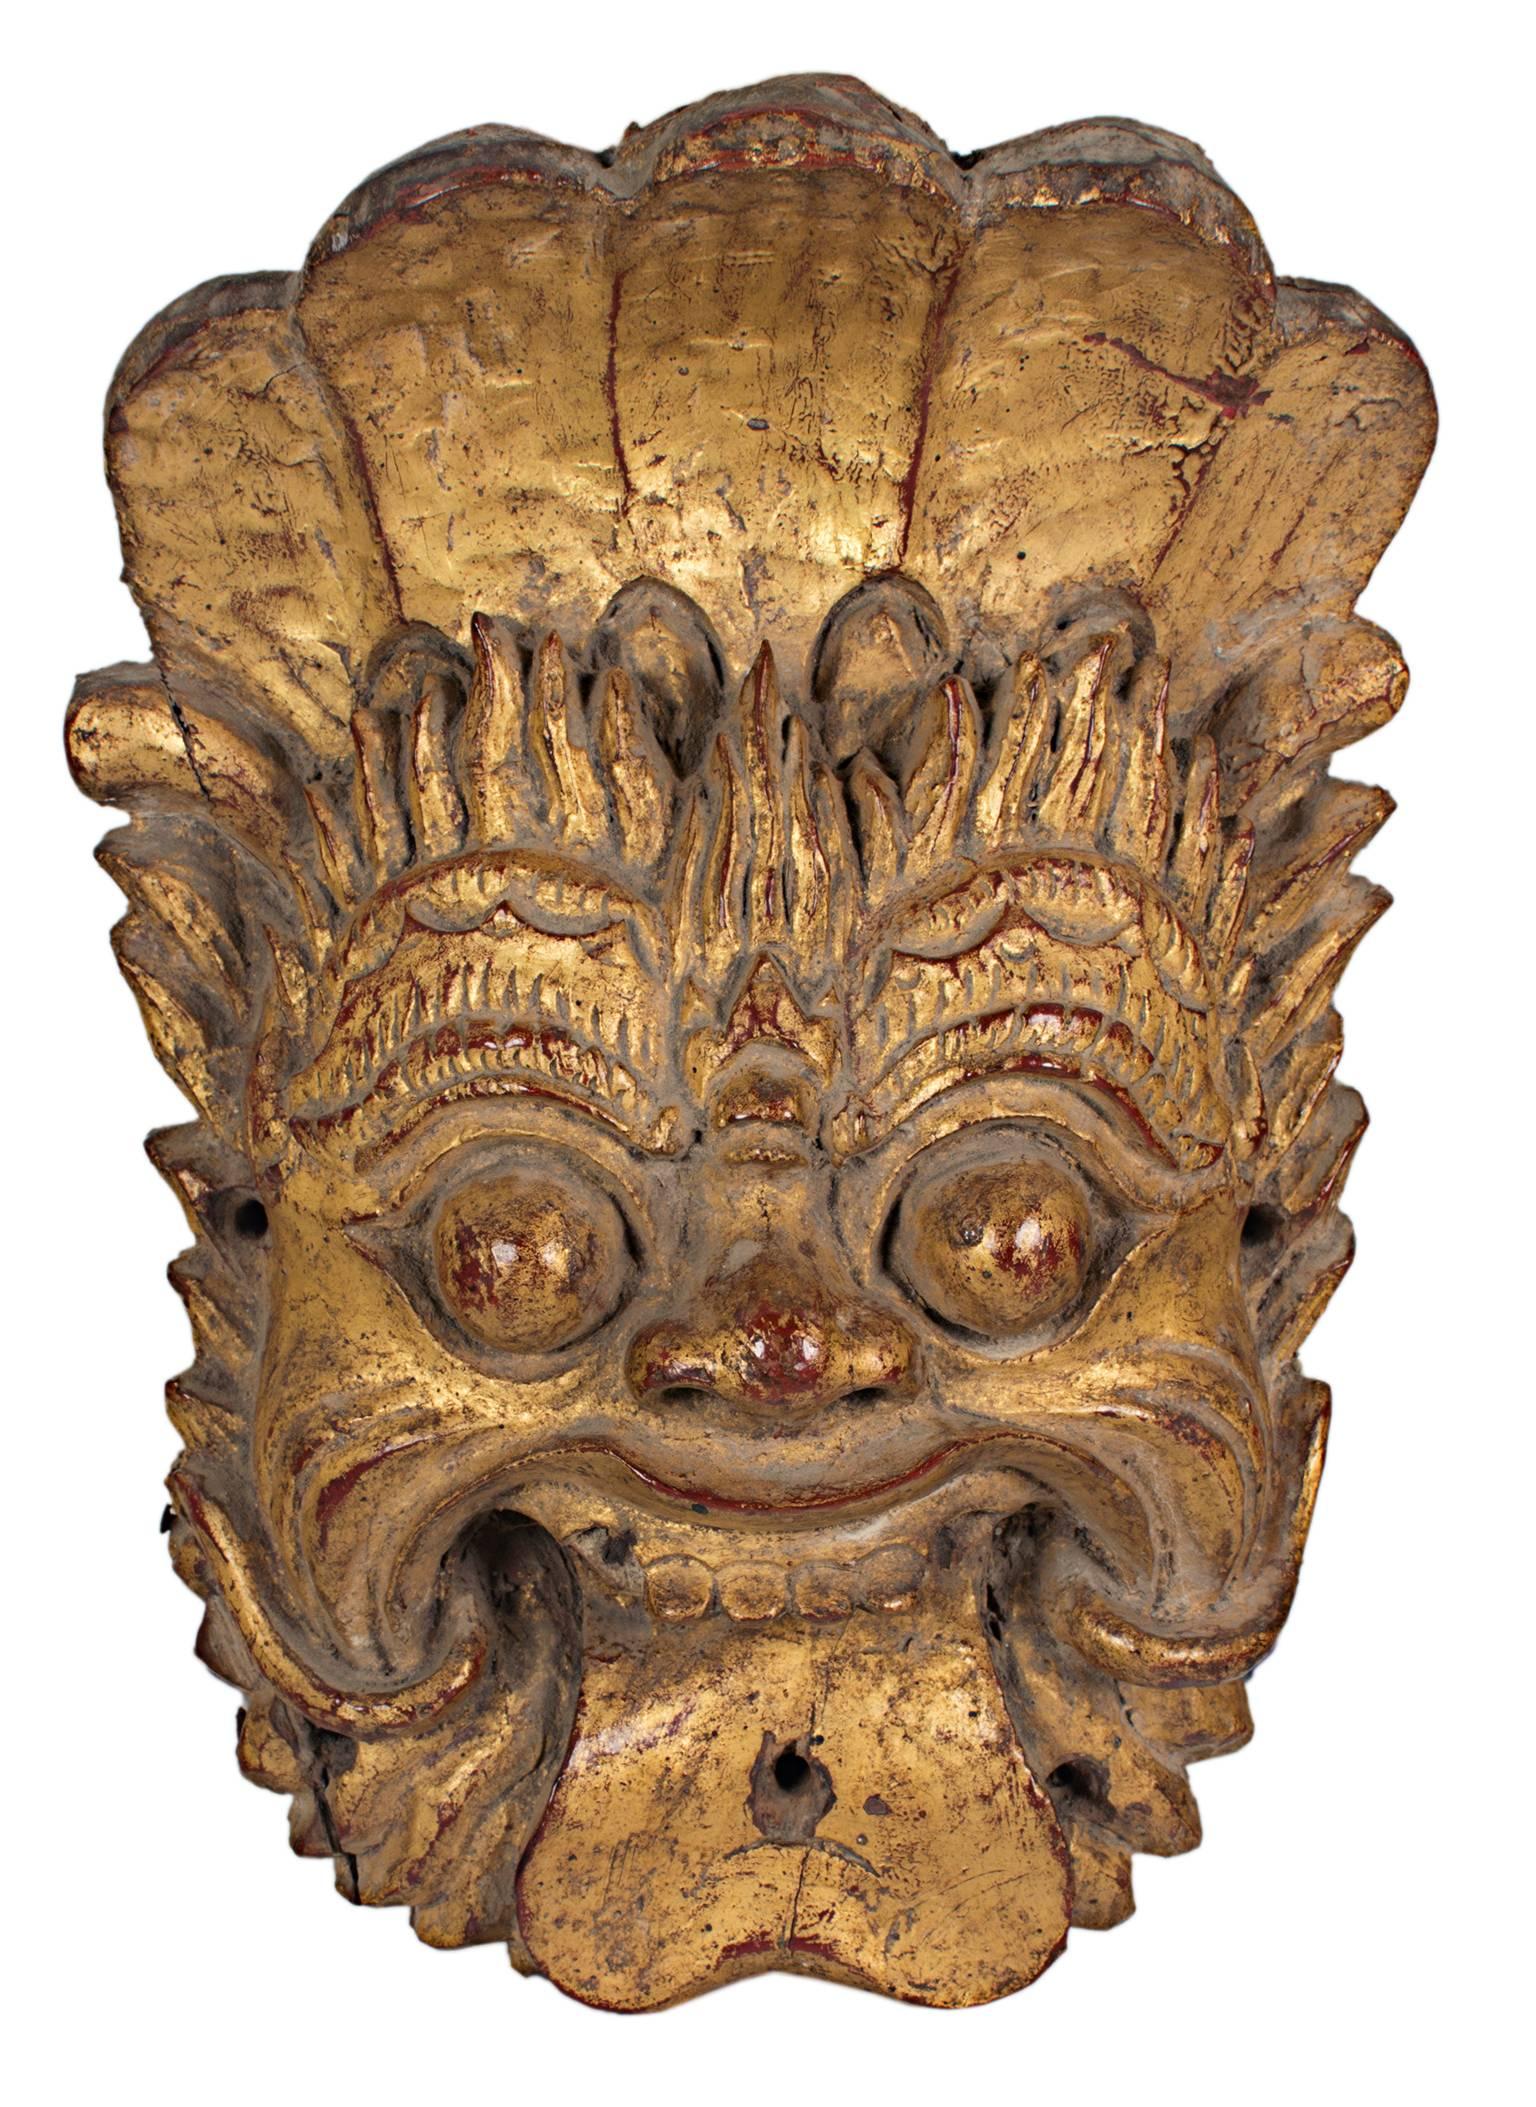 "Indonesian Mask, " Wood with Gold Leaf of Smiling Man - Sculpture by Unknown